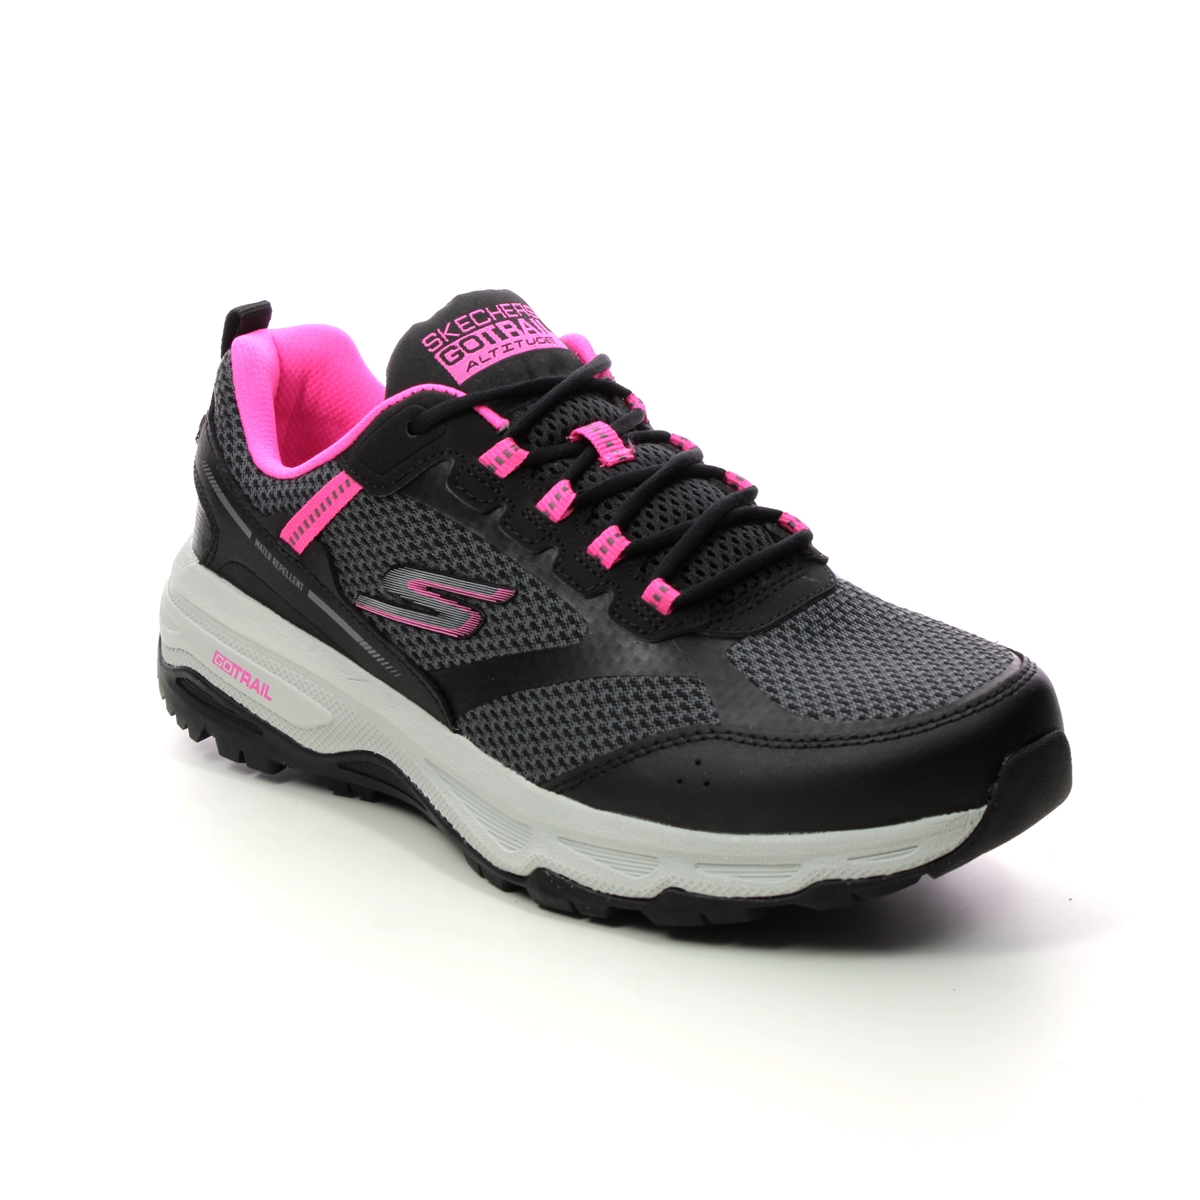 Skechers Go Run Trail Black Pink Womens Trainers 128200 In Size 4 In Plain Black Pink